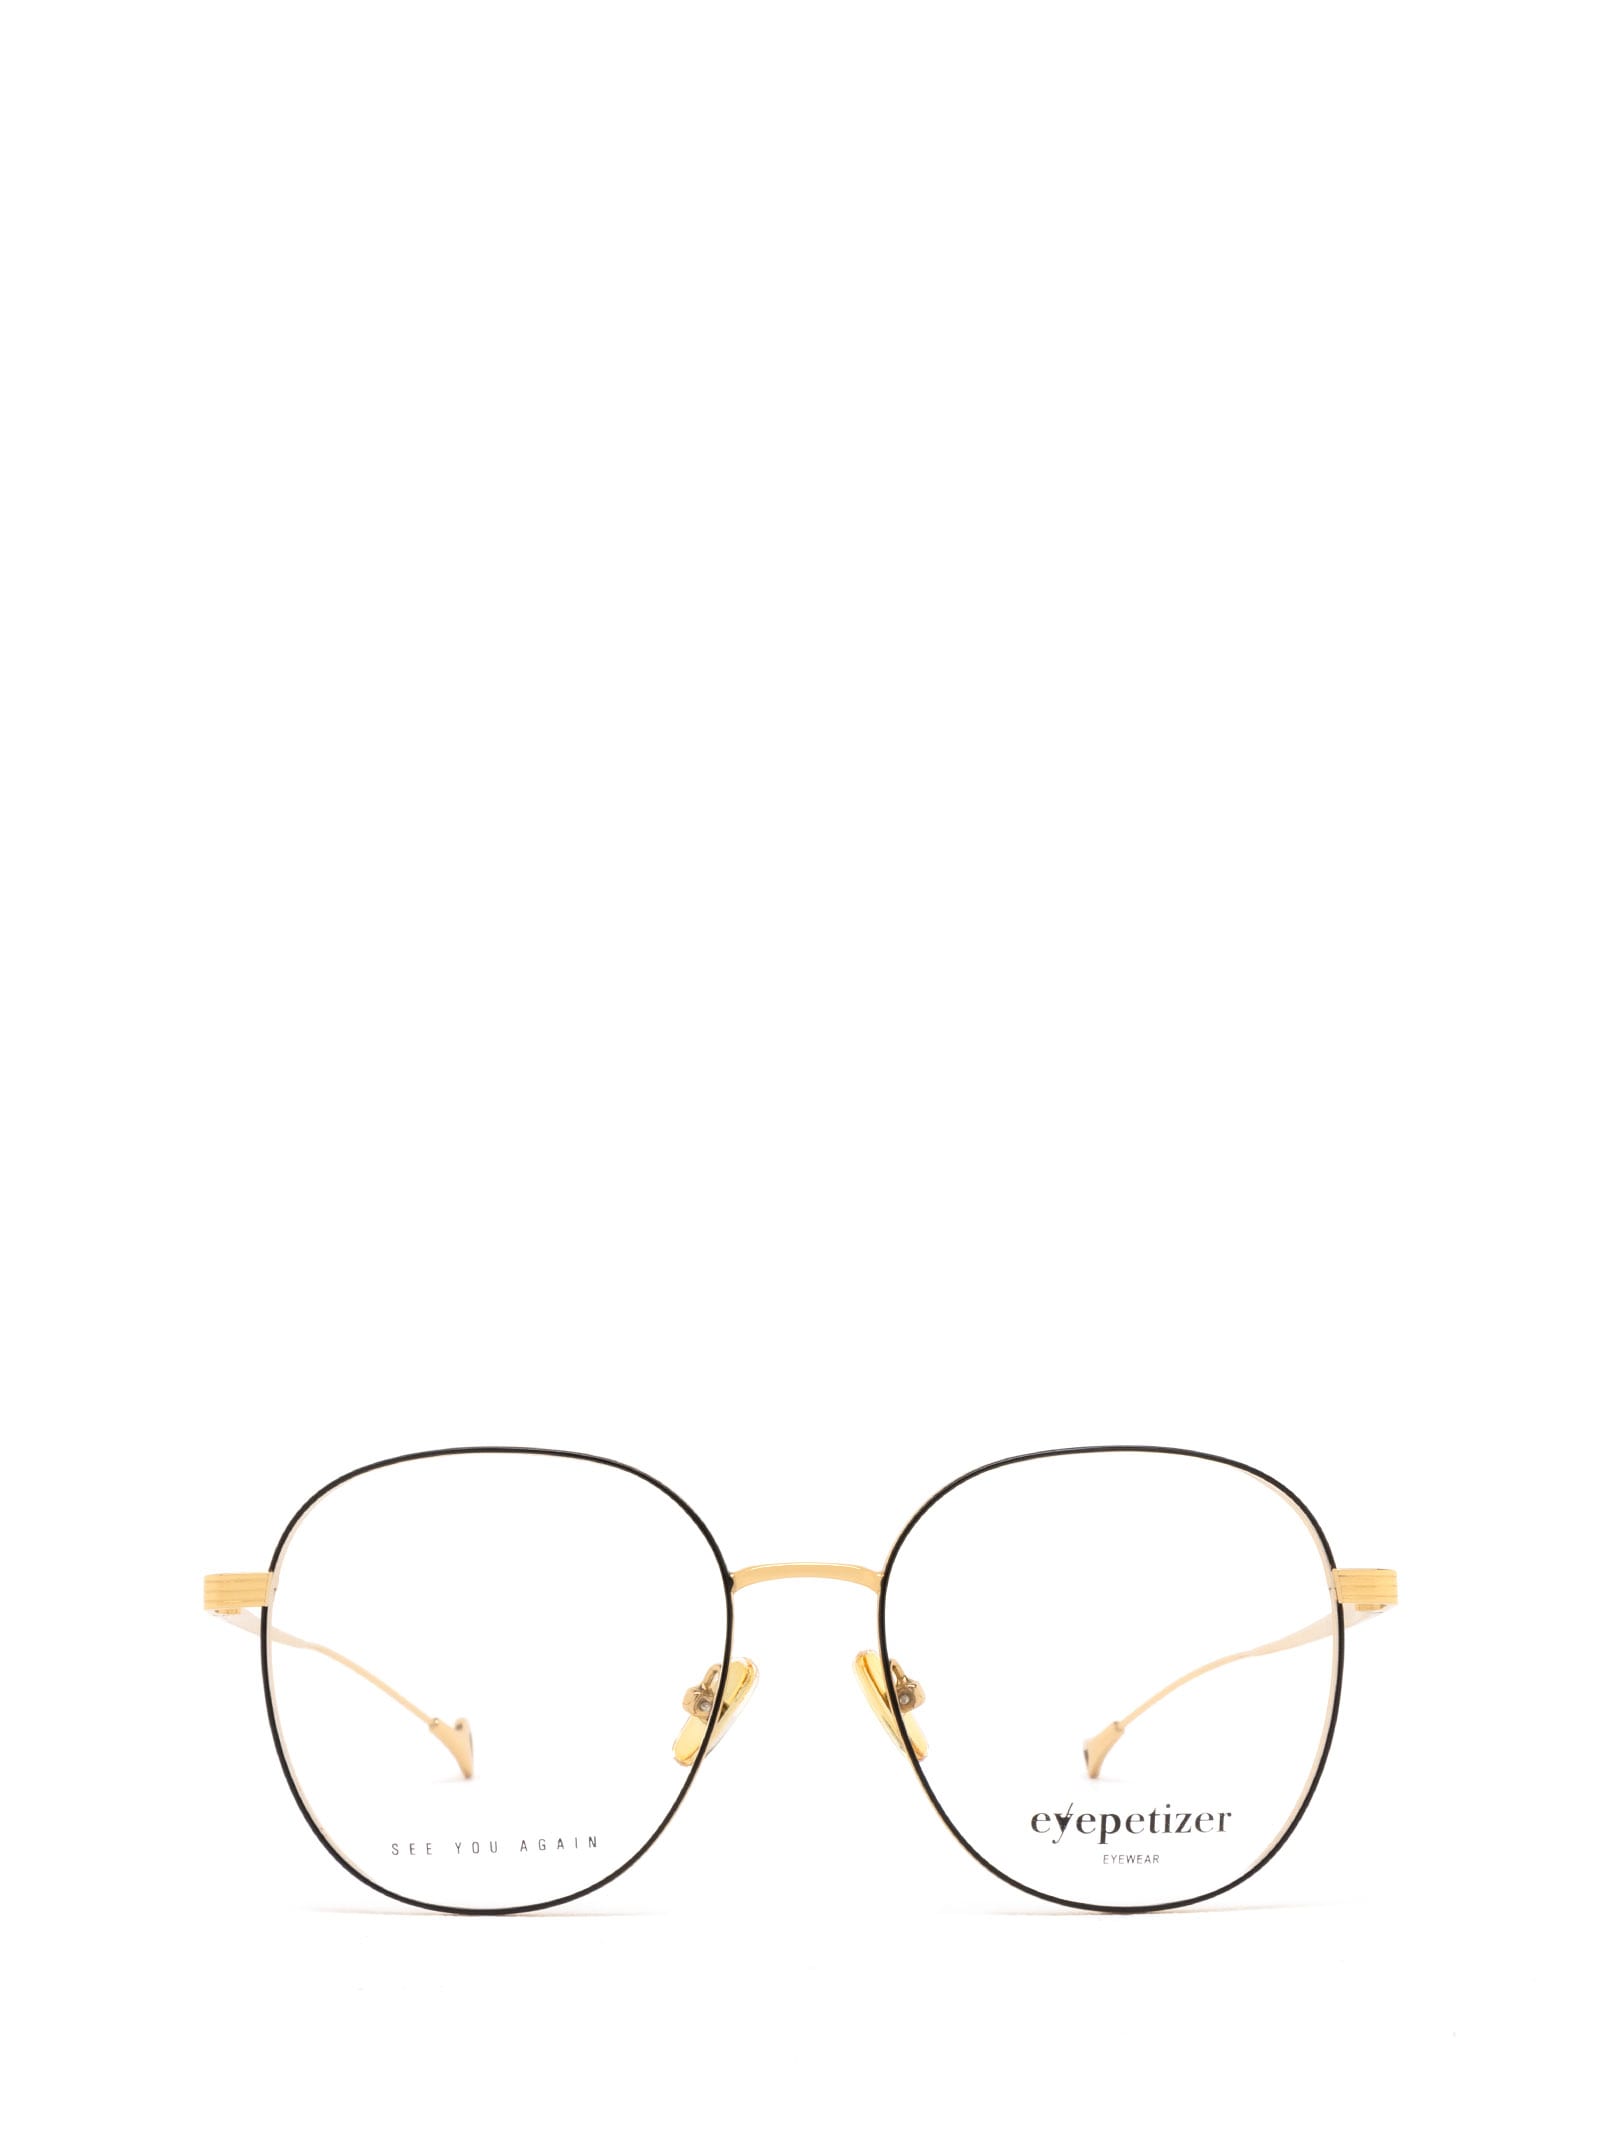 Nelson Pale Gold Glasses